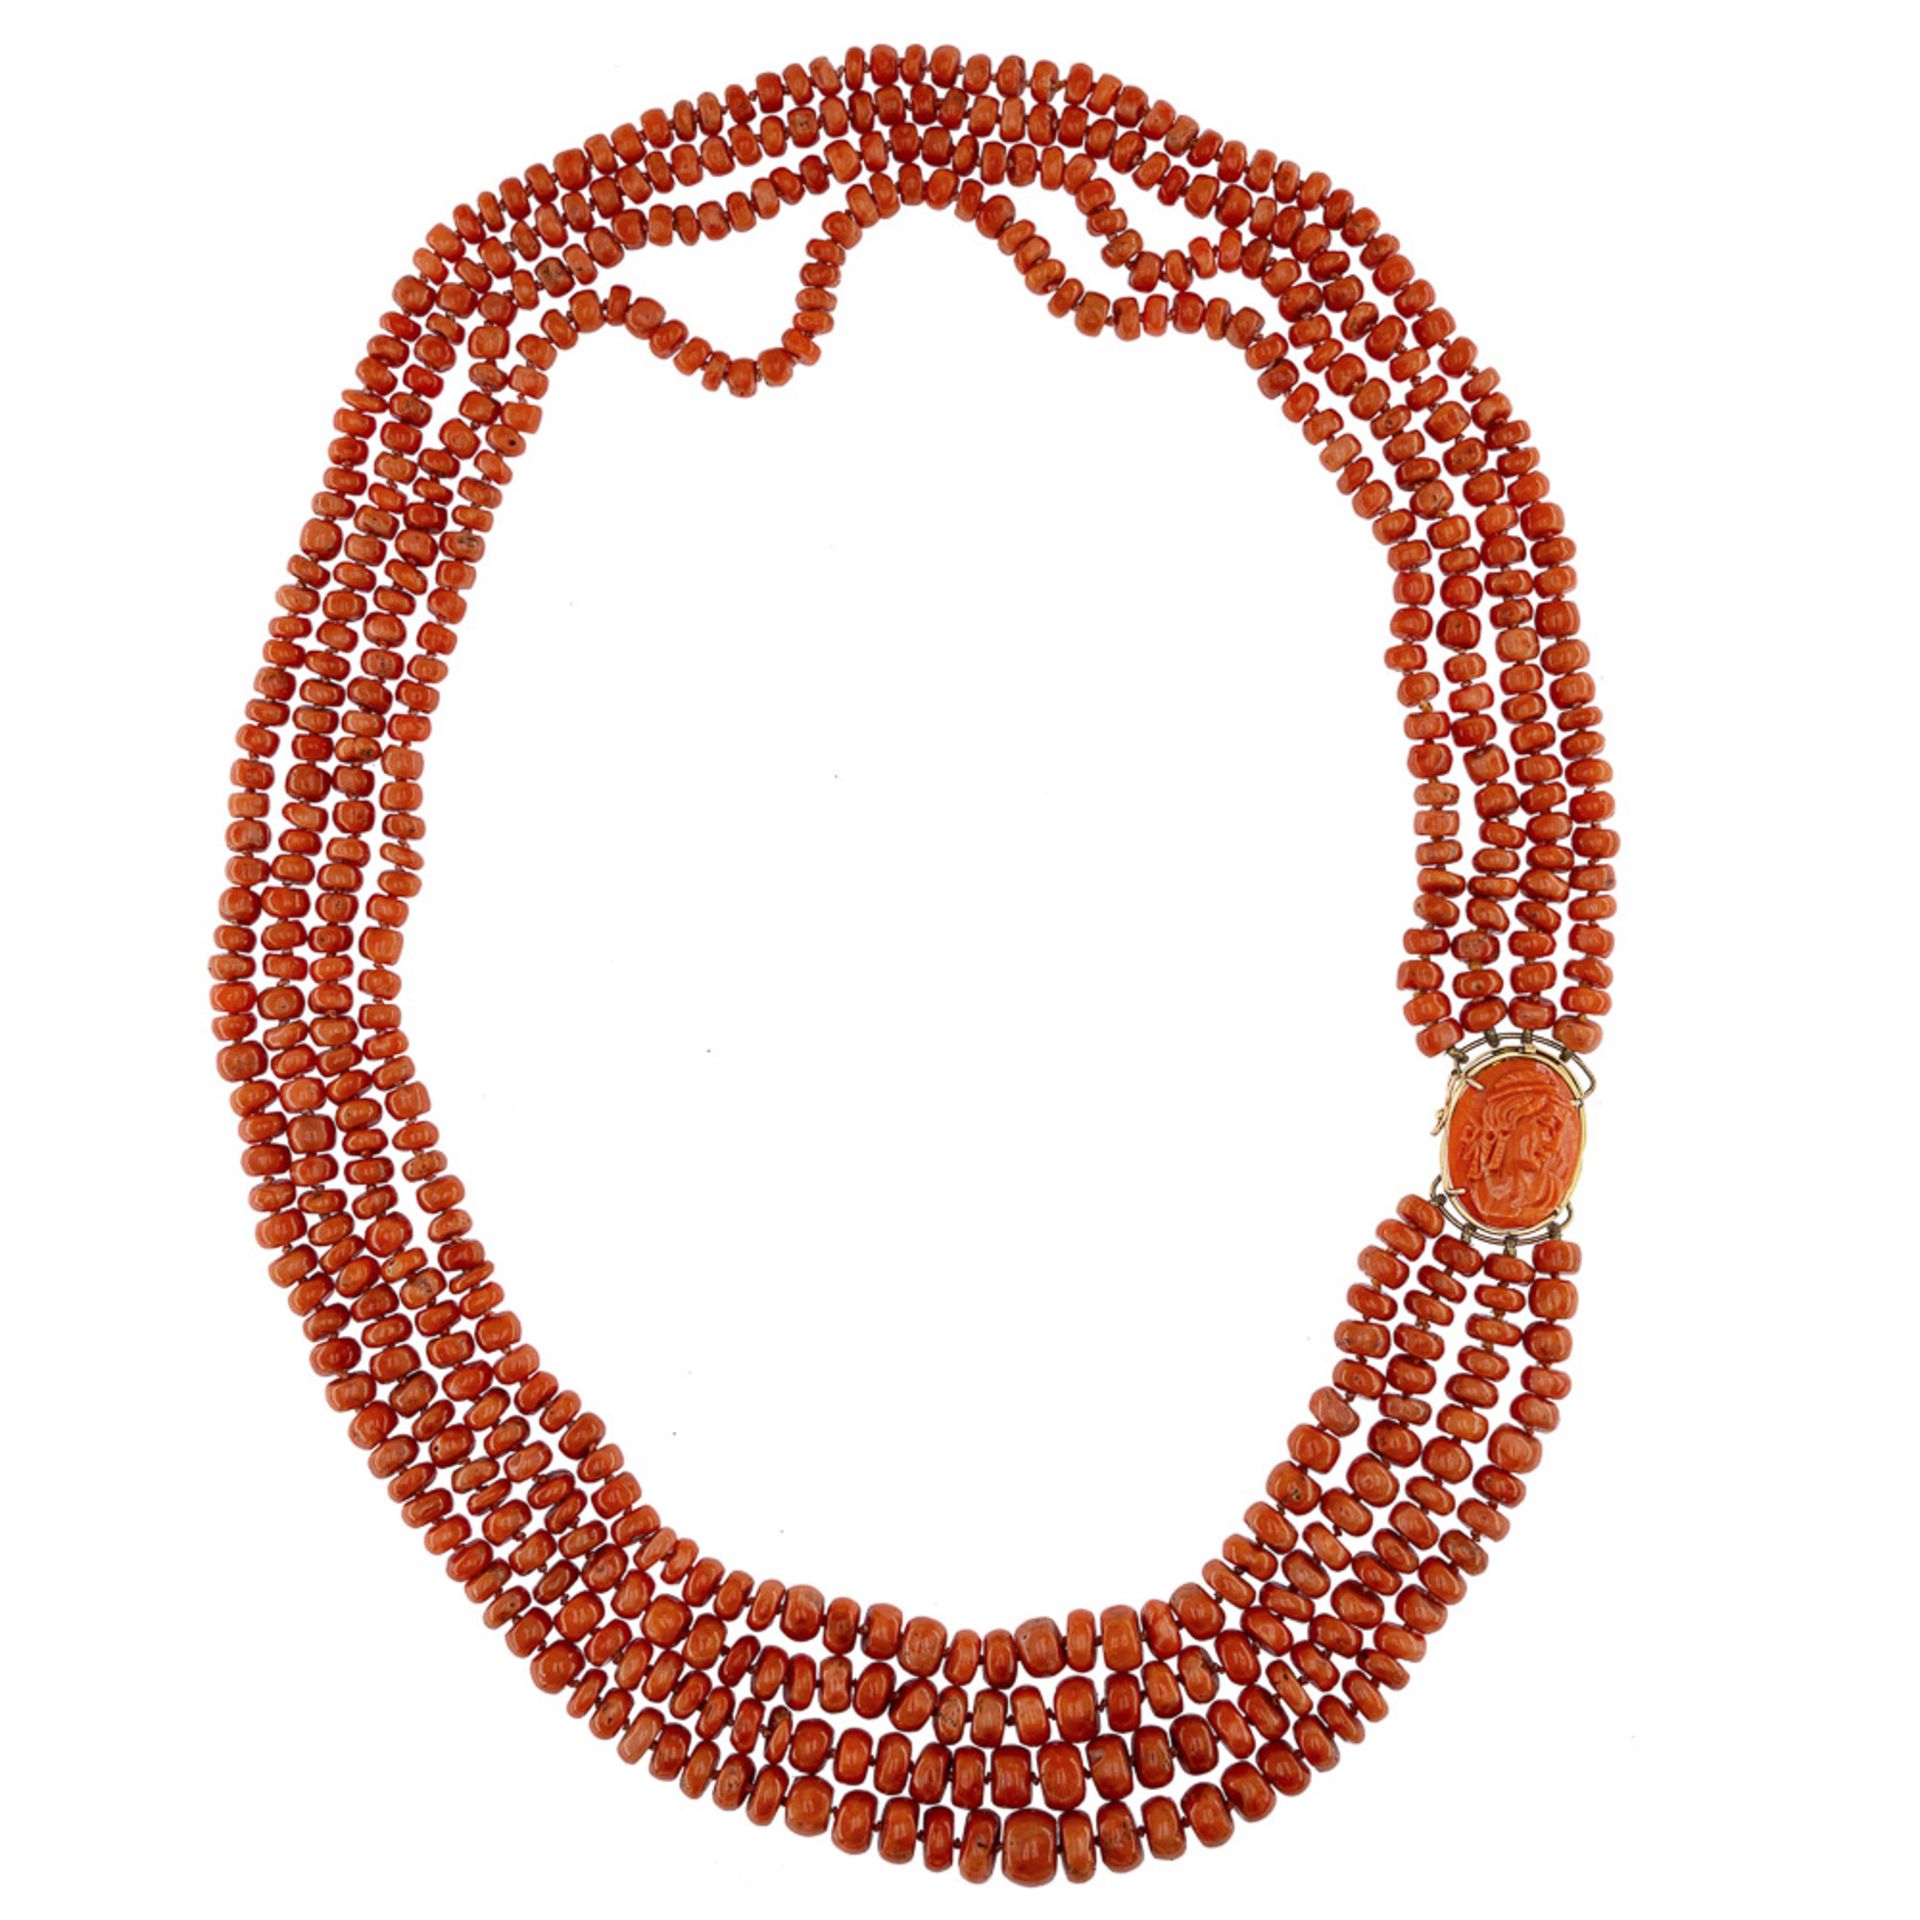 Four strands of Sciacca coral necklace